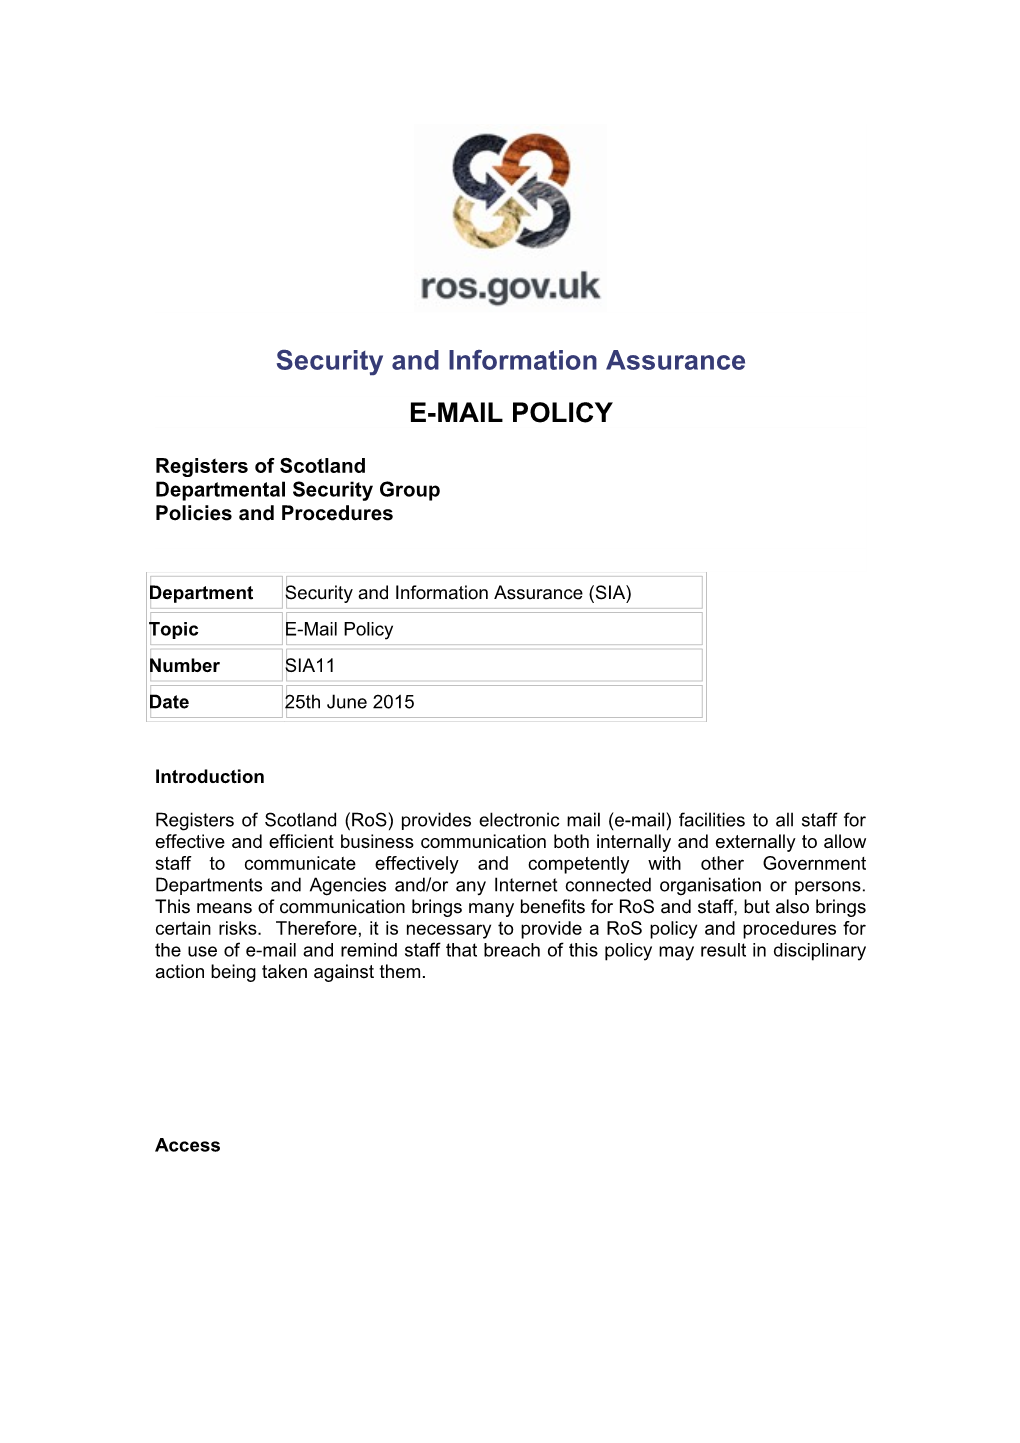 Registers of Scotland E-Mail Policy